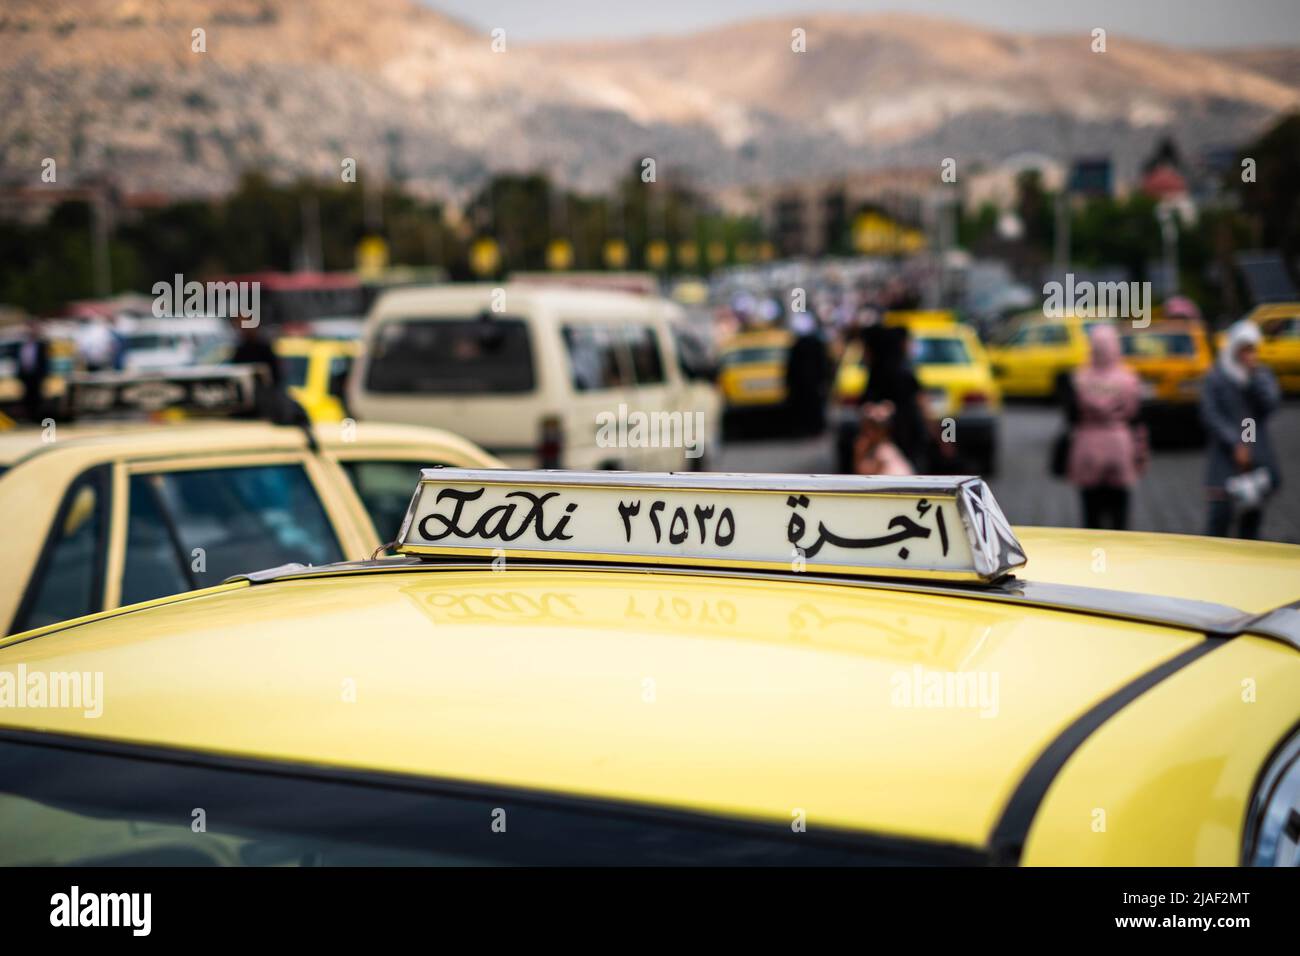 Damascus, Syria - May, 2022: Taxi sign closeup on Taxi car in street traffic of Damascus Stock Photo